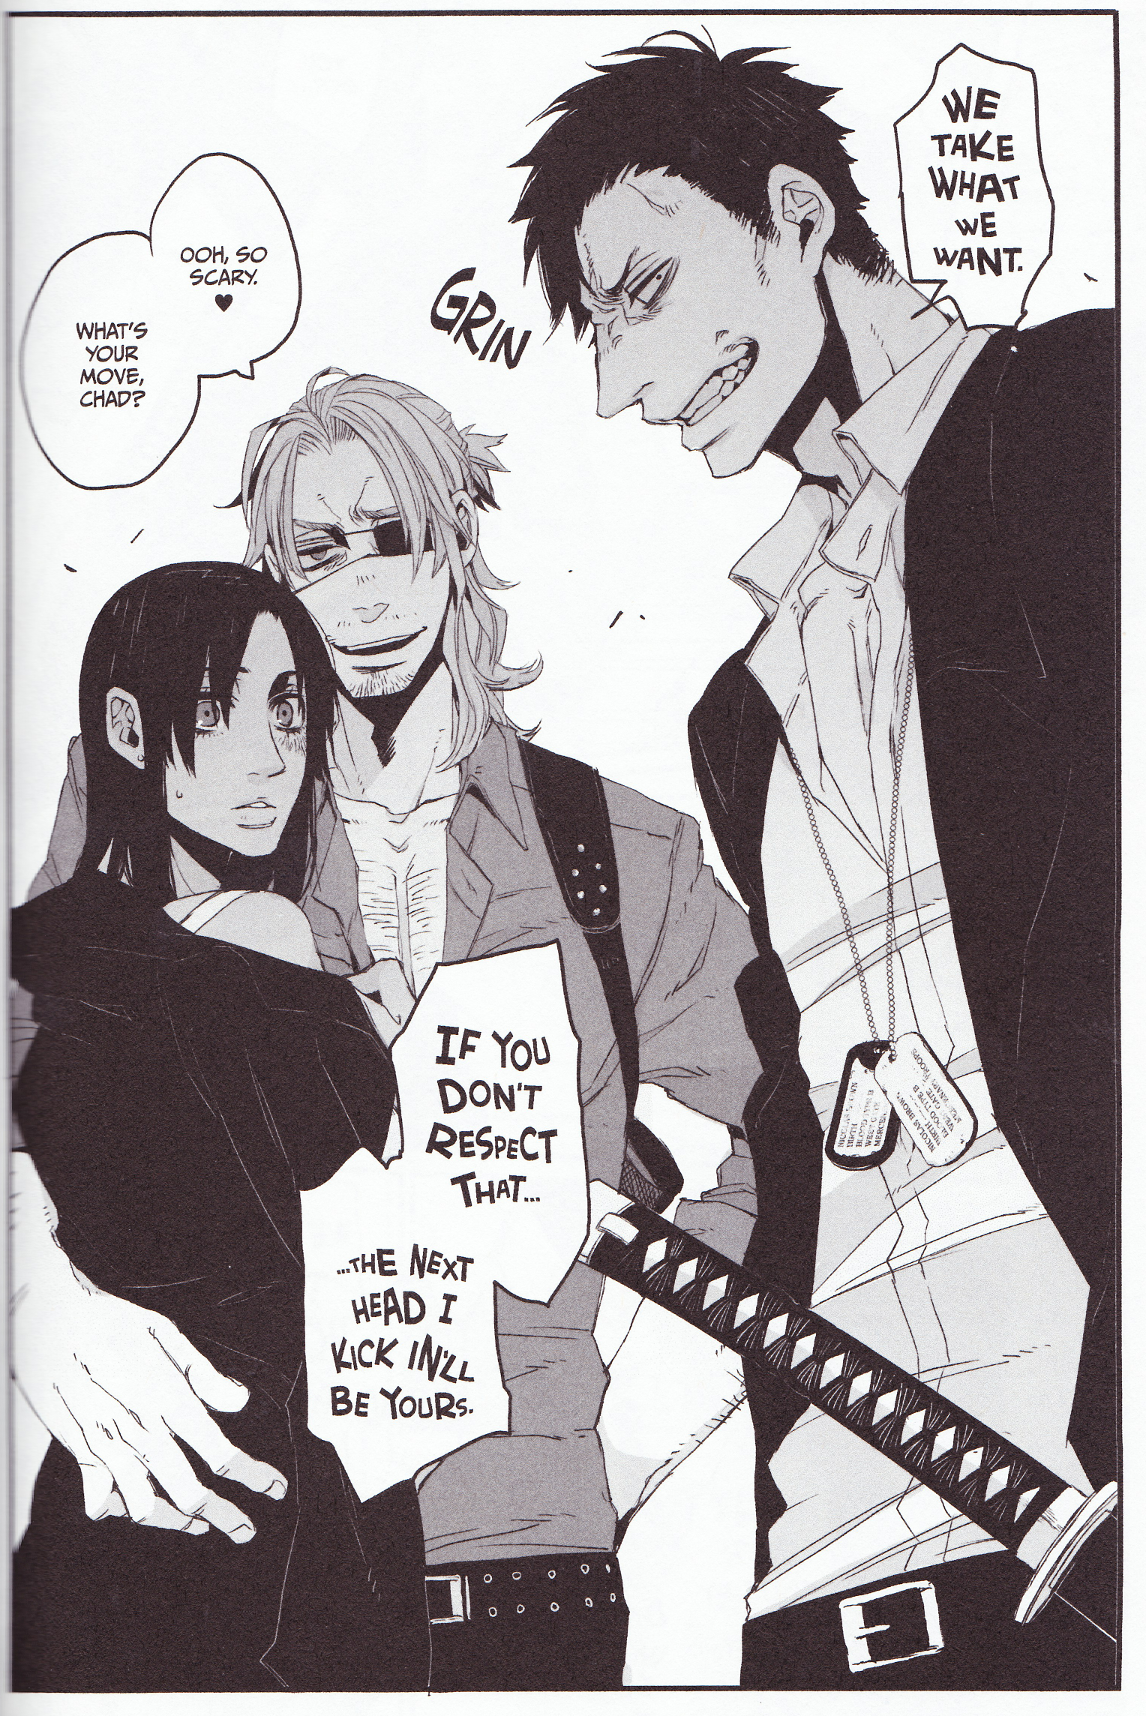 Manga Worth Reading #2: Gangsta. - Sequential State